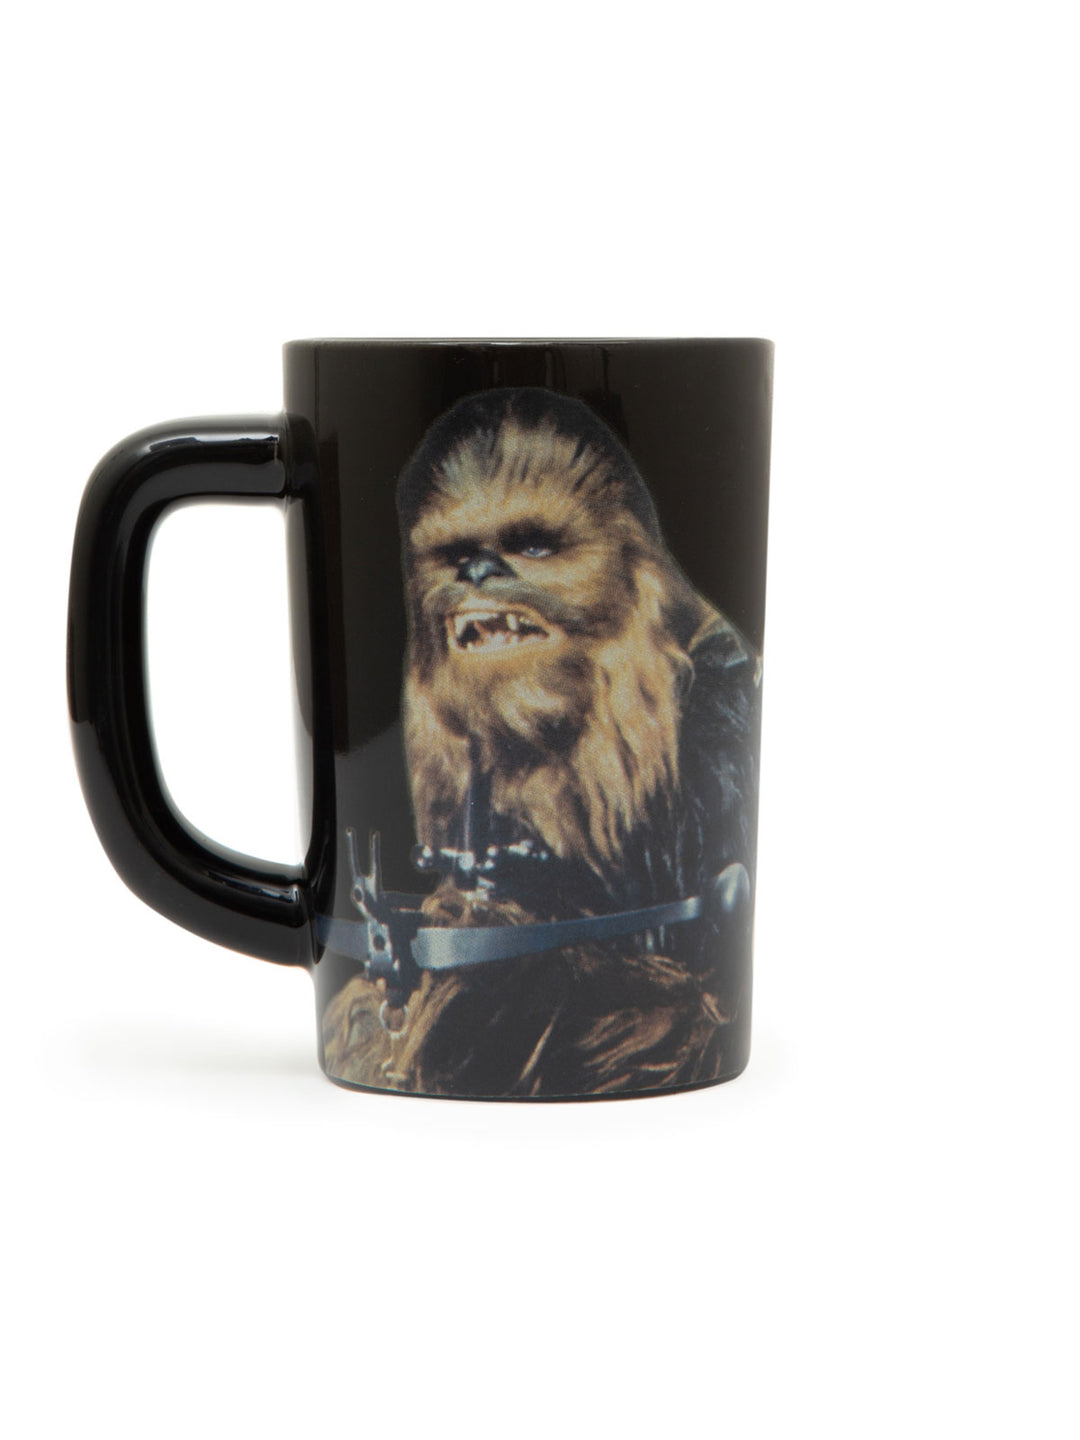 Read Han and Chewie Mug - Main Image Number 1 of 2